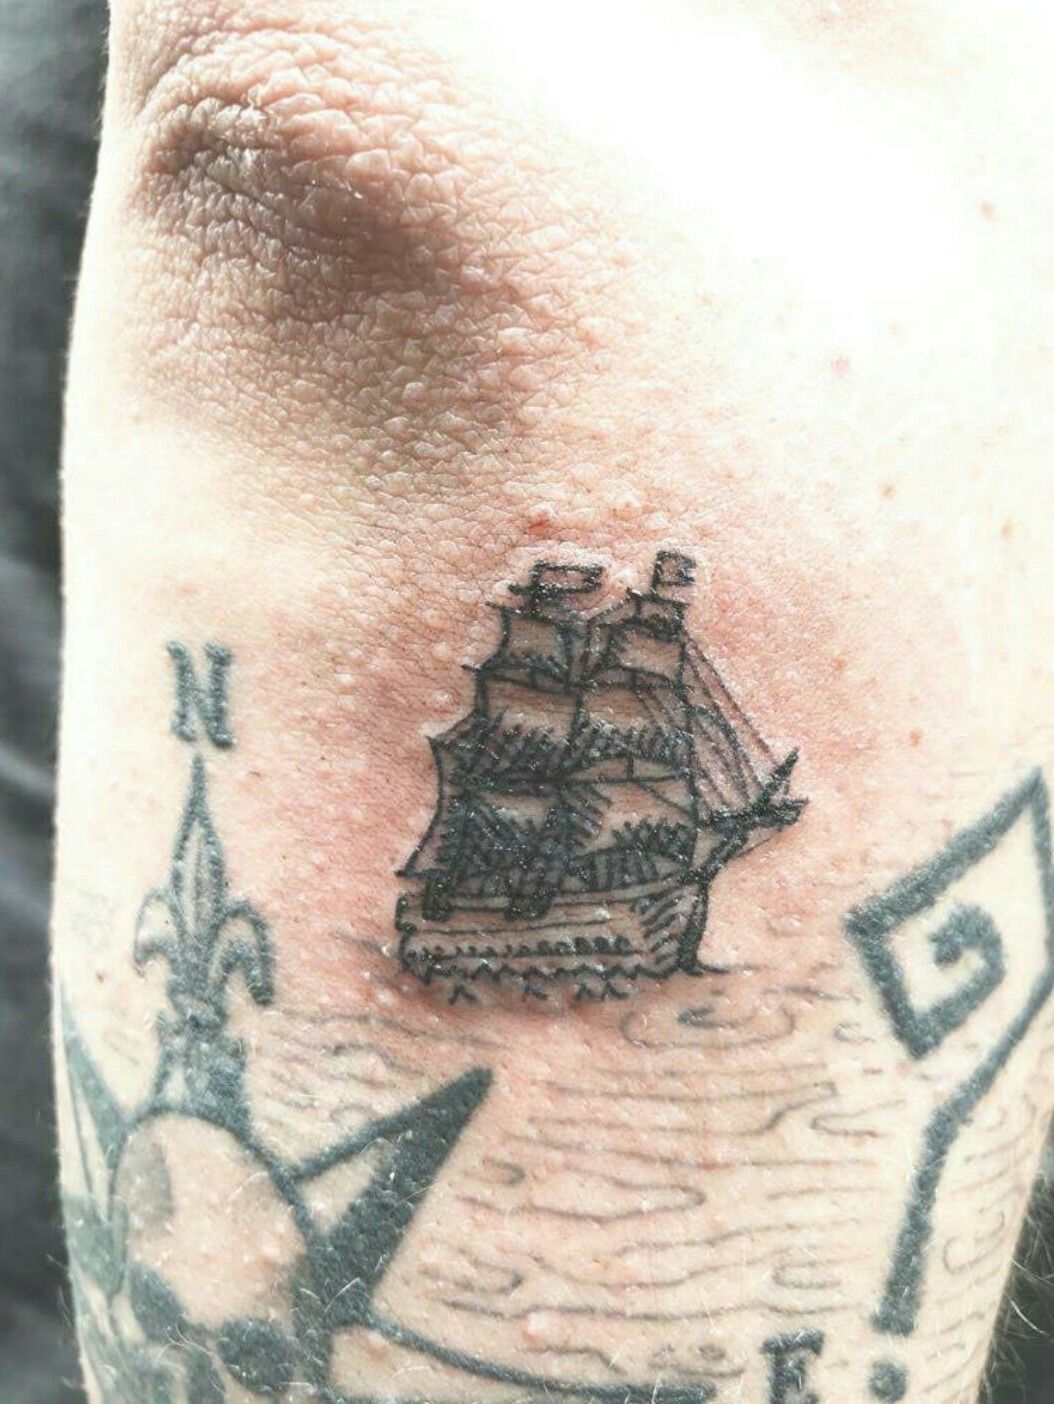 Tattoo uploaded by Ian Lakin  Pirate ship designed and performed by Gary  at Vivid Tattoo San Diego CA  Tattoodo